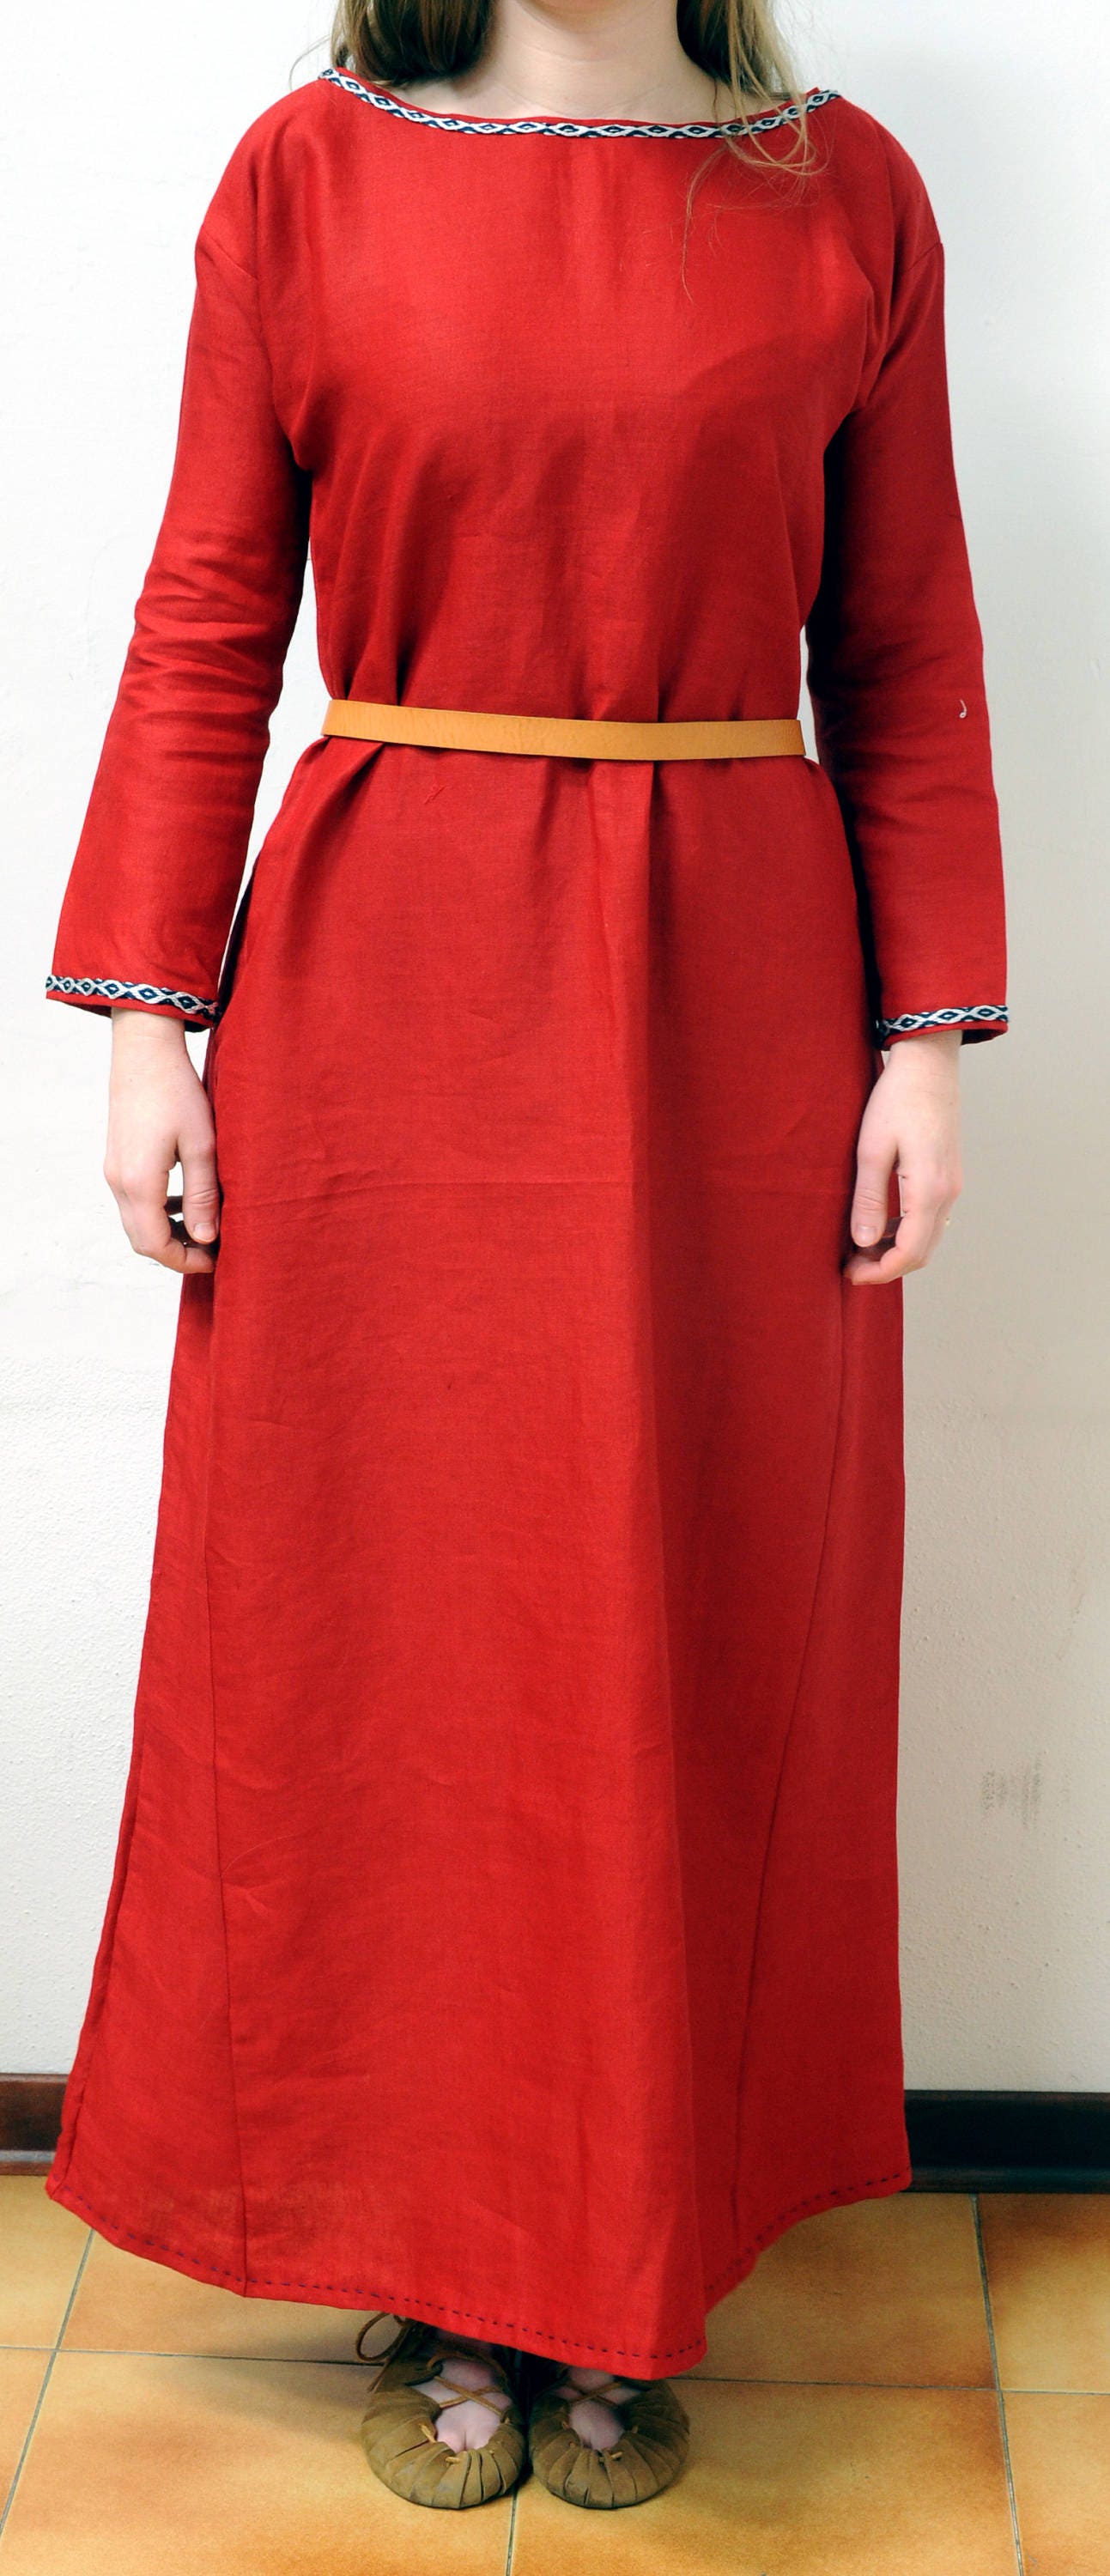 Medieval dress in red linen for women ready for delivery. For | Etsy